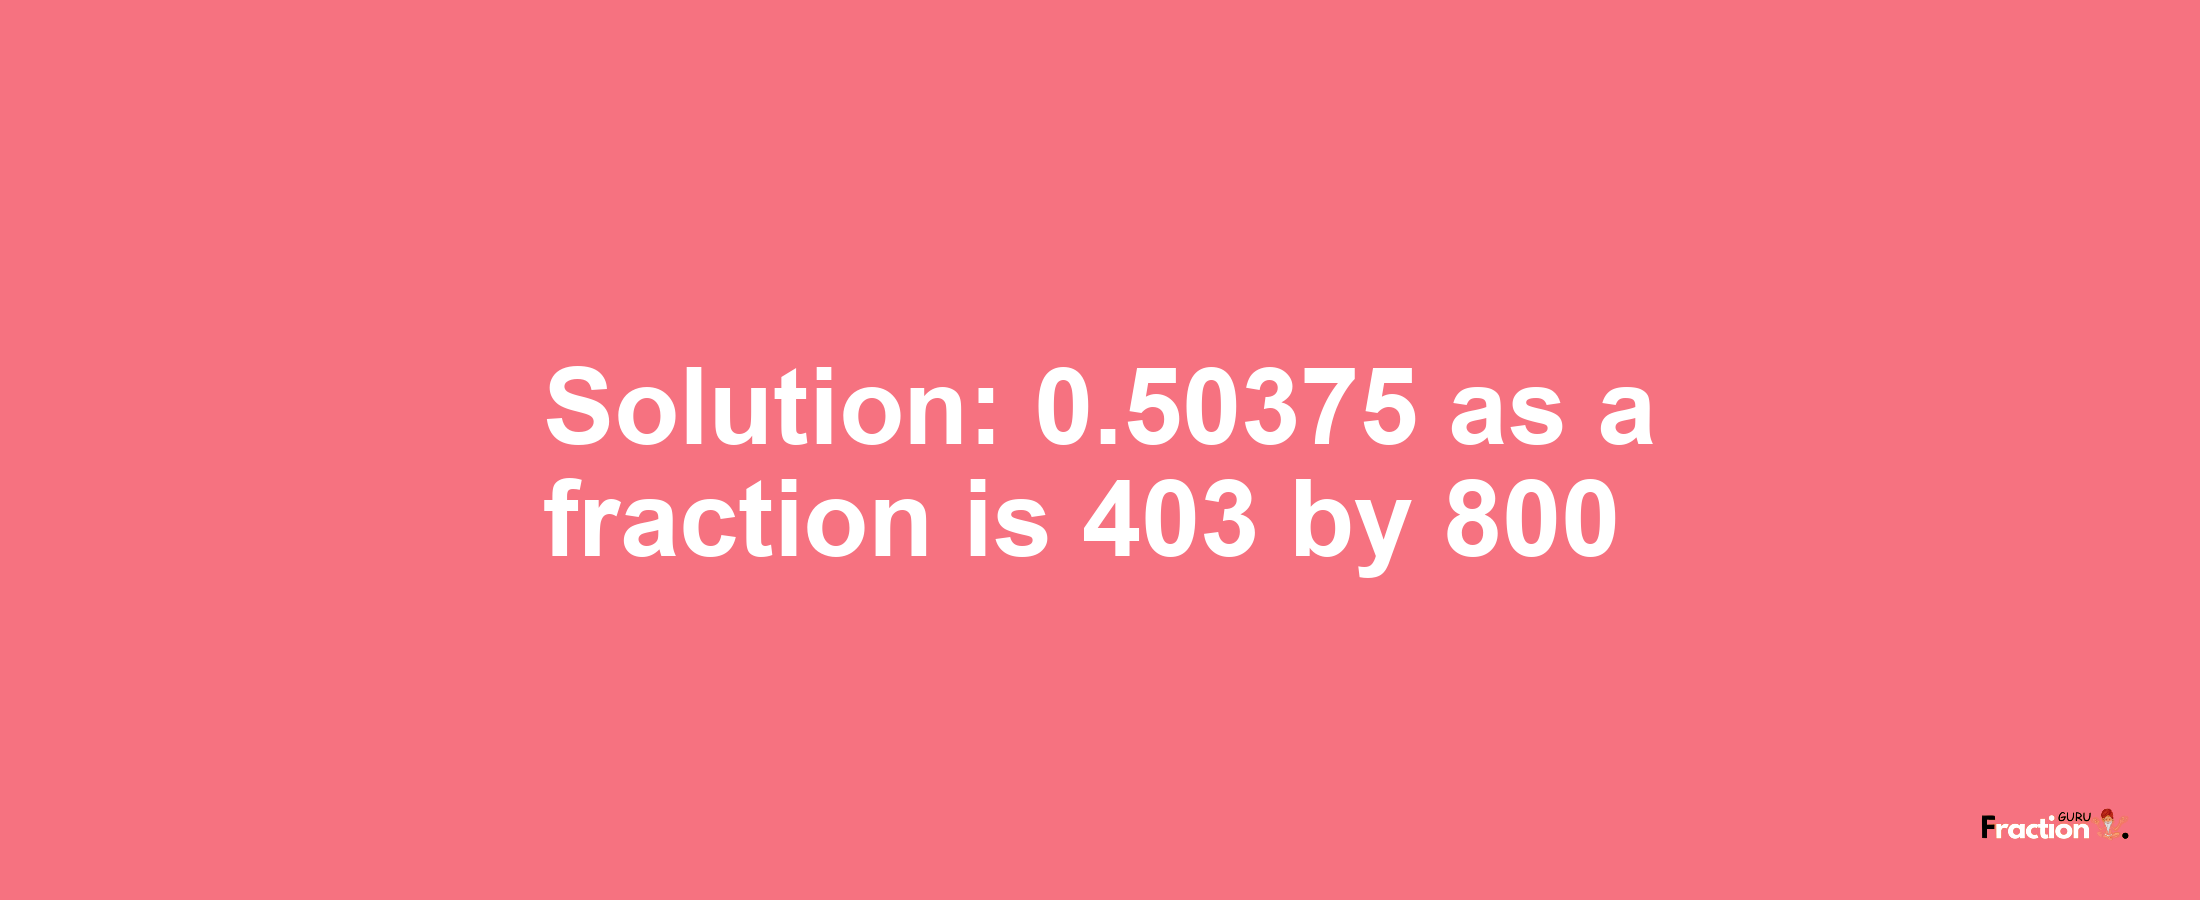 Solution:0.50375 as a fraction is 403/800